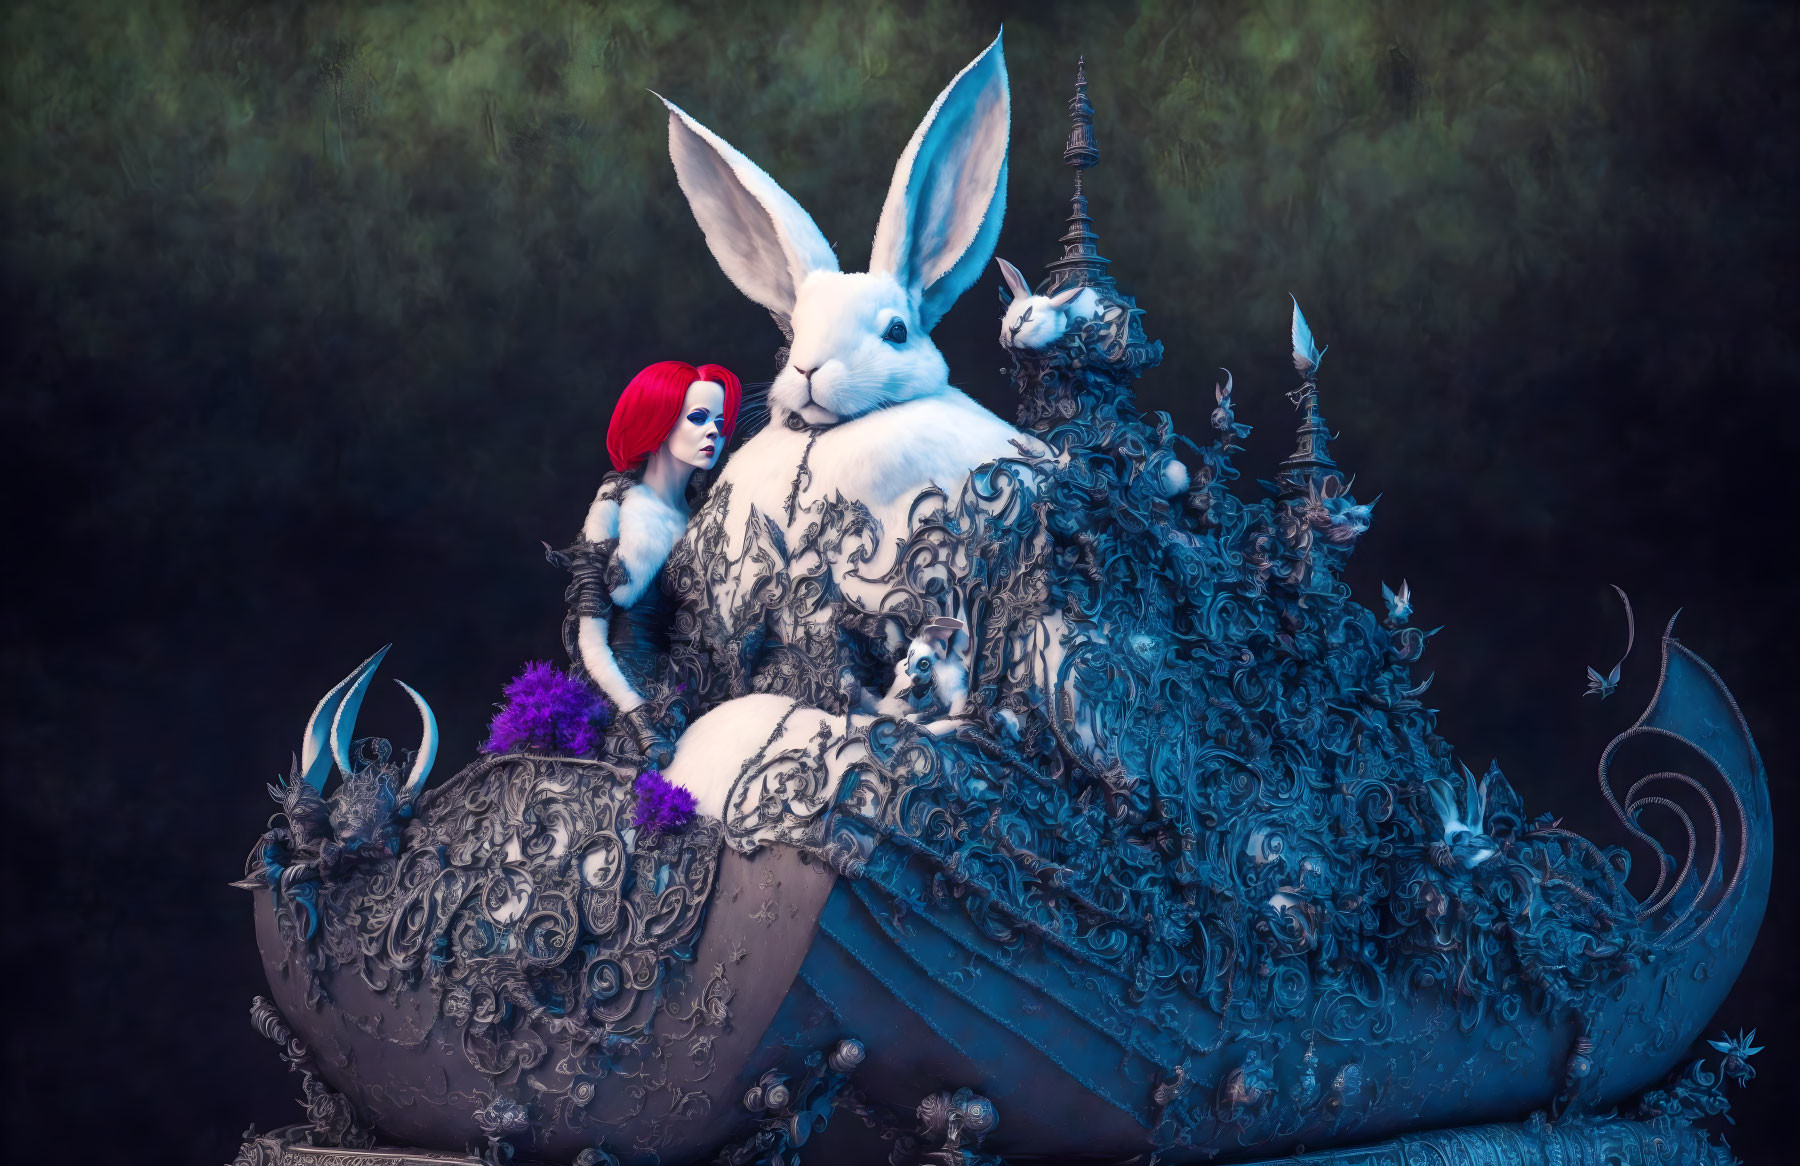 Surreal image of woman with red hair and white rabbit on ornate structure